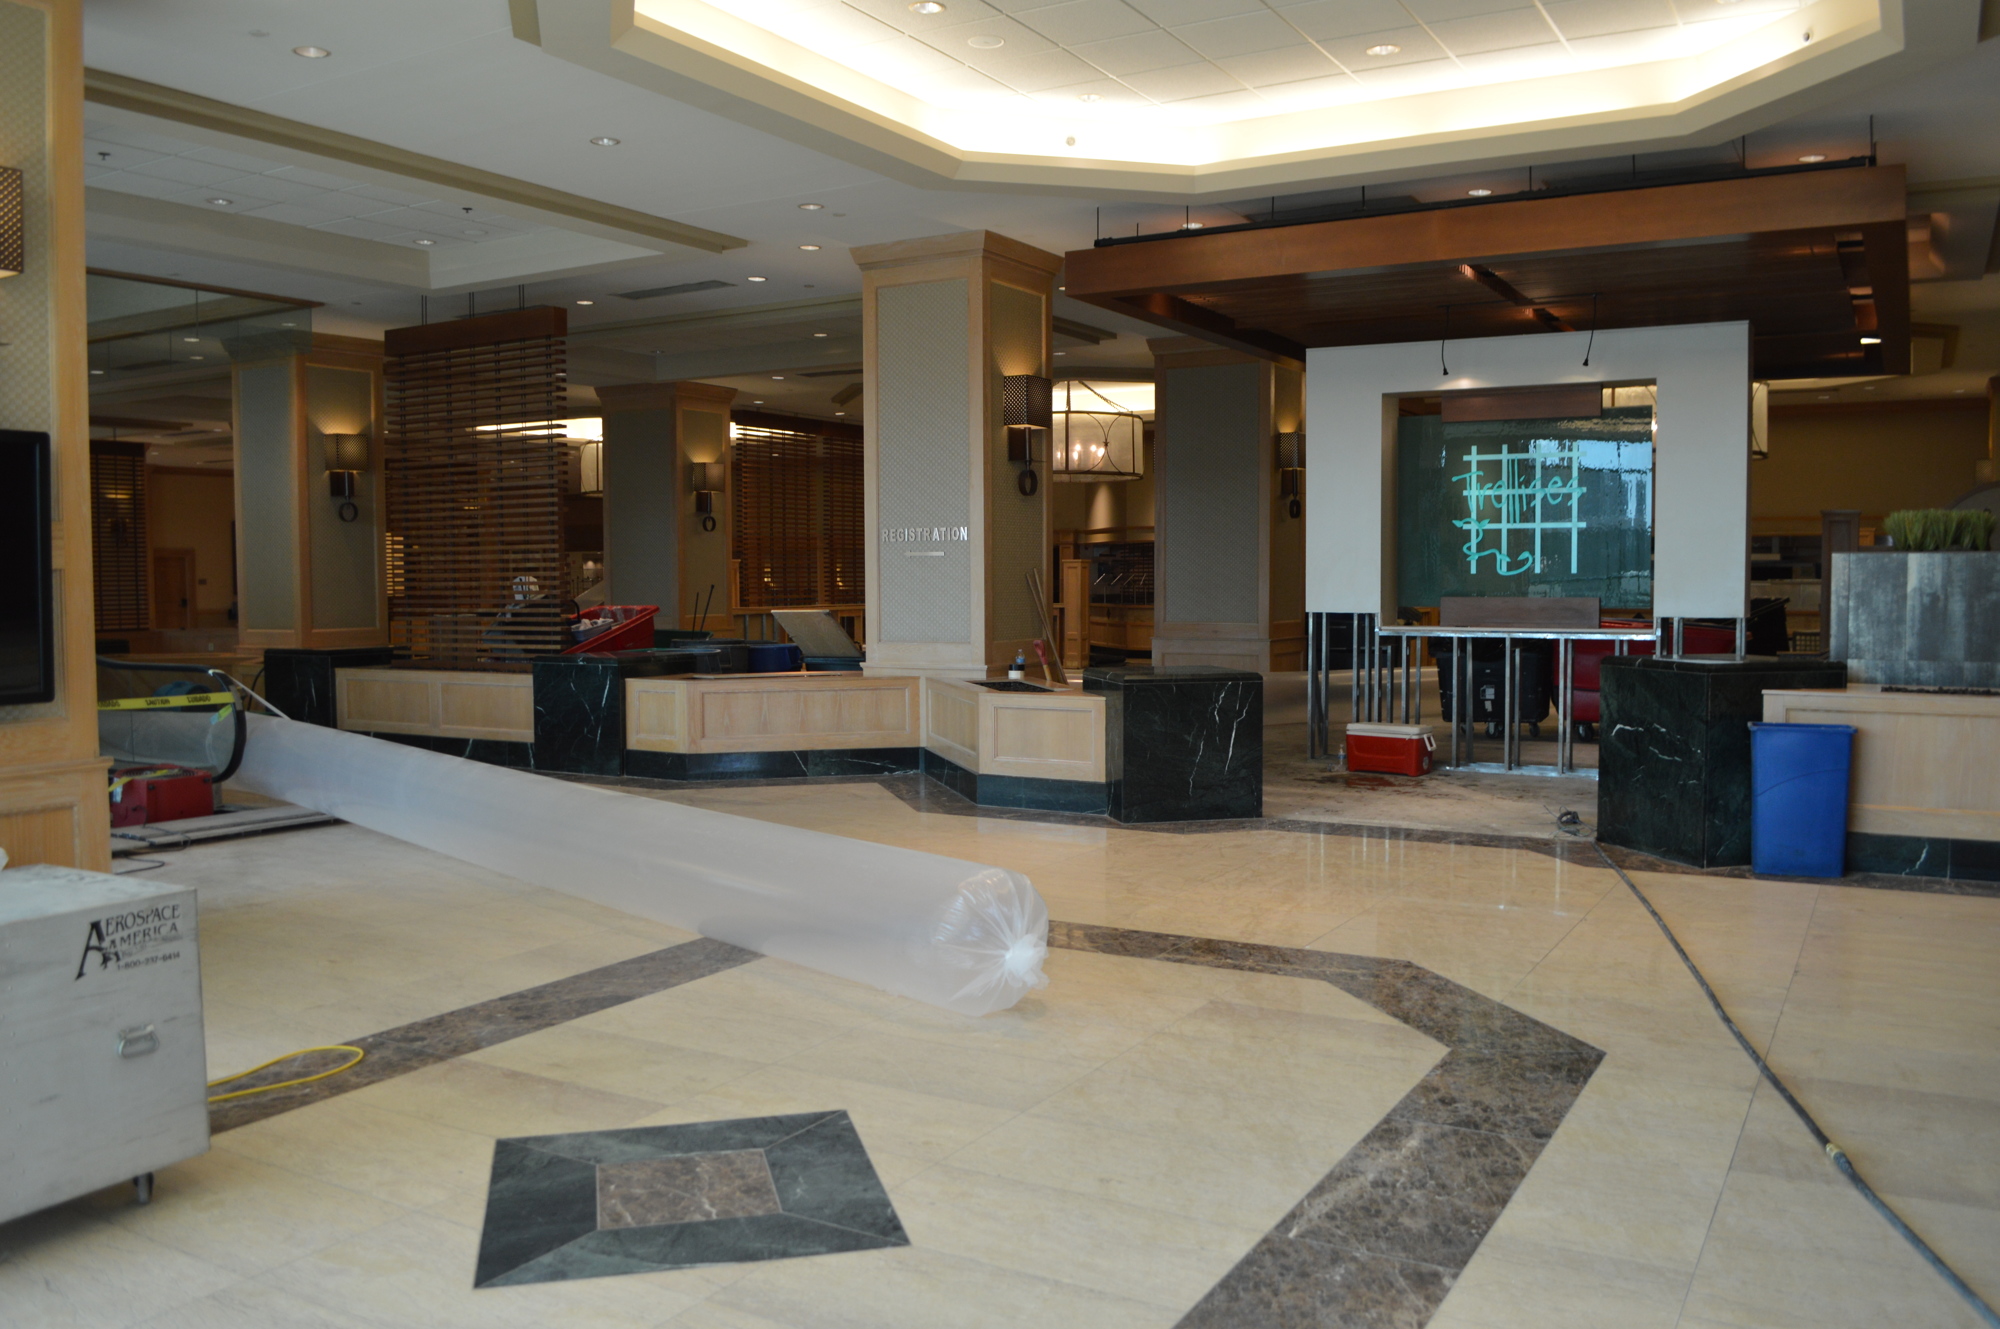 The lobby of the Hyatt Regency Jacksonville Riverfront hotel was still being cleaned Friday from the aftermath of Hurricane Irma.